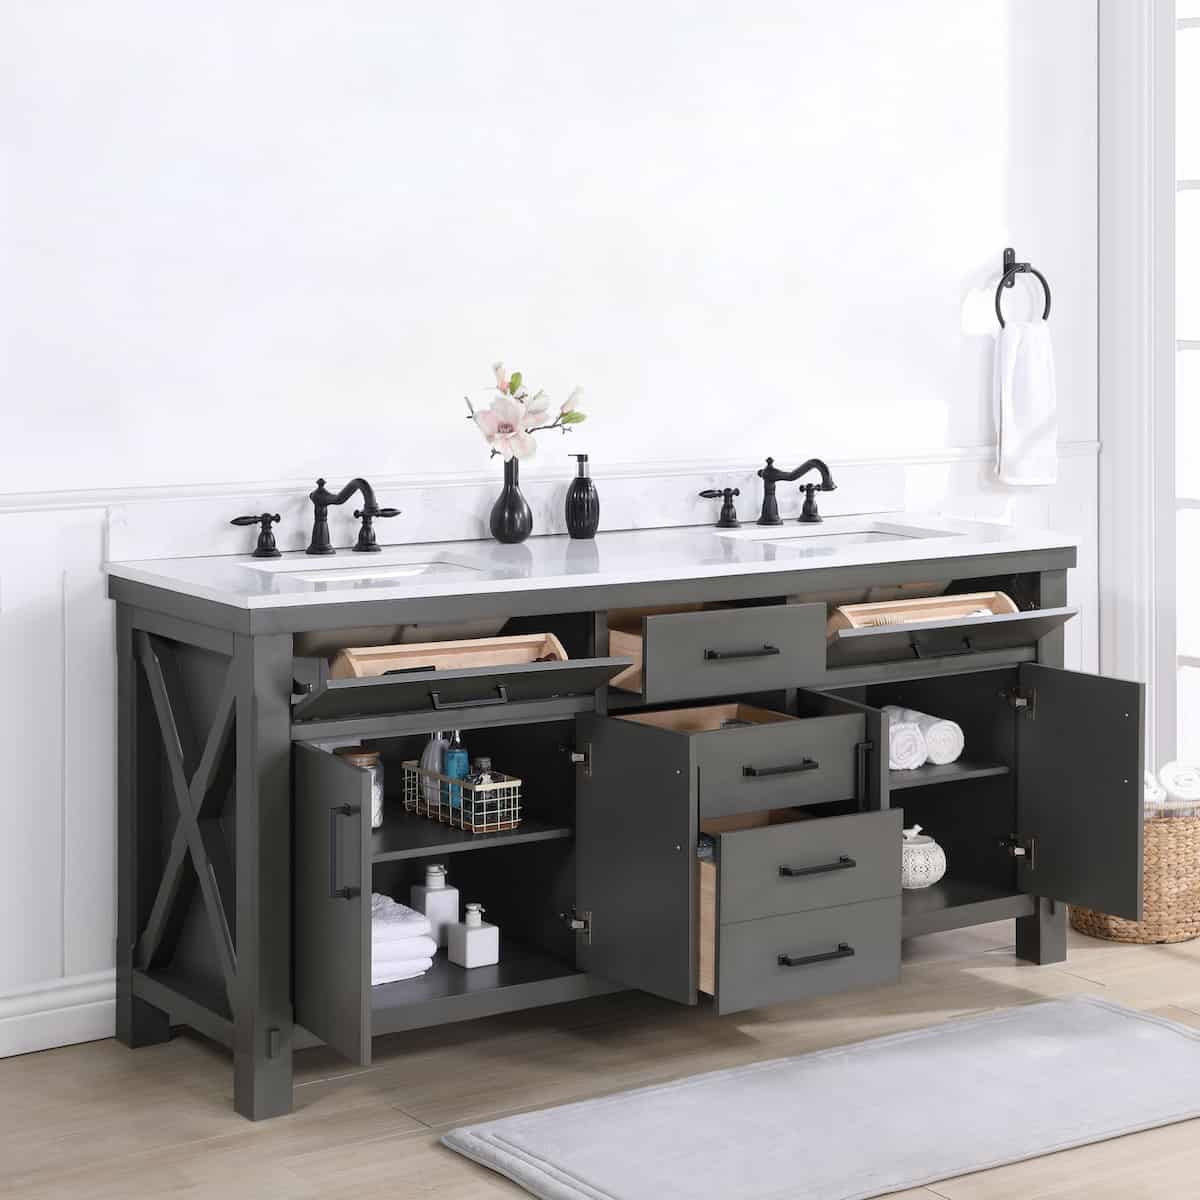 Vinnova Viella 72 Inch Freestanding Double Sink Bath Vanity in Rust Grey Finish with White Composite Countertop Without Mirror Inside 701872-RU-WS-NM